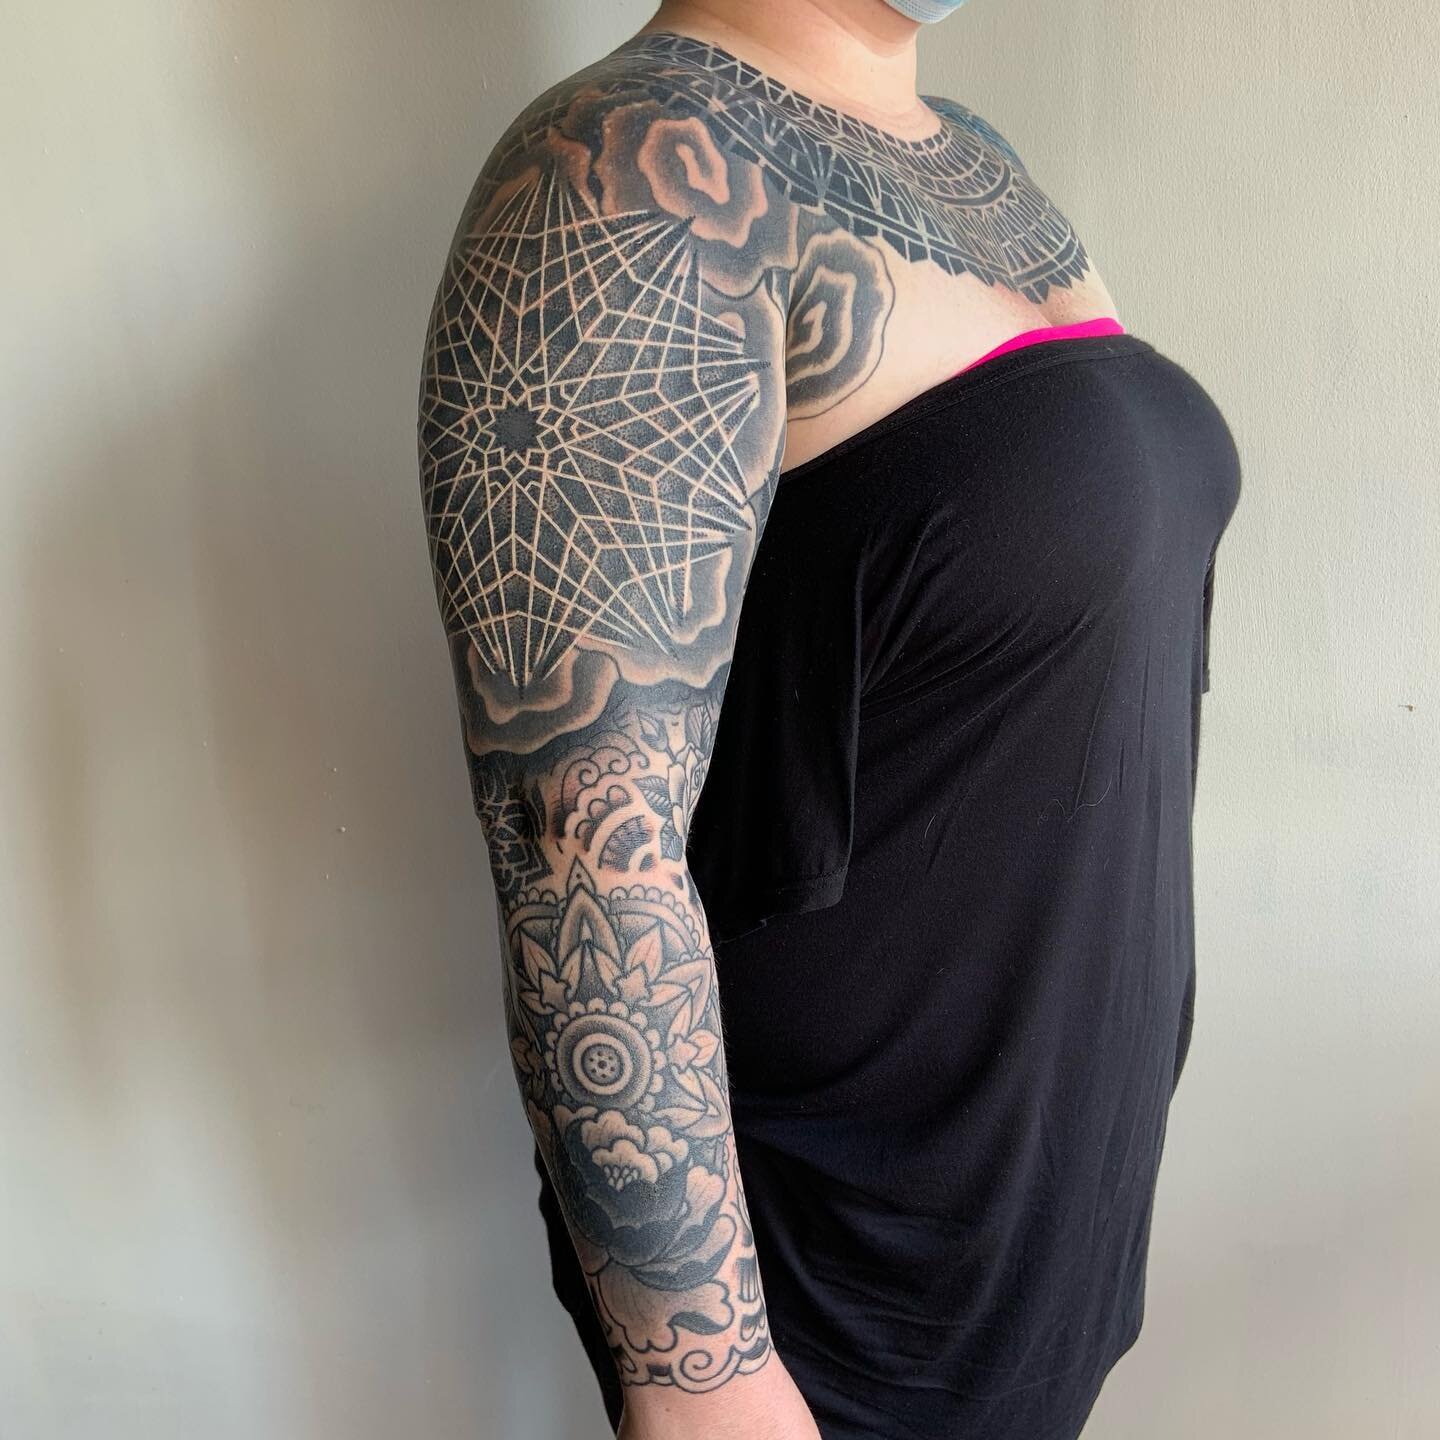 Been tattooing my friend Kelsey for awhile now. Made some good progress on the sleeve and chest blast overs!
Done @good_karma_tattoo 

.
.
.
.
.
.
.
.
.
.
.
#tttism #dotworktattoos #occultarcana #tattrx #omfgeometry #geometrip #geometrictattoohunter 